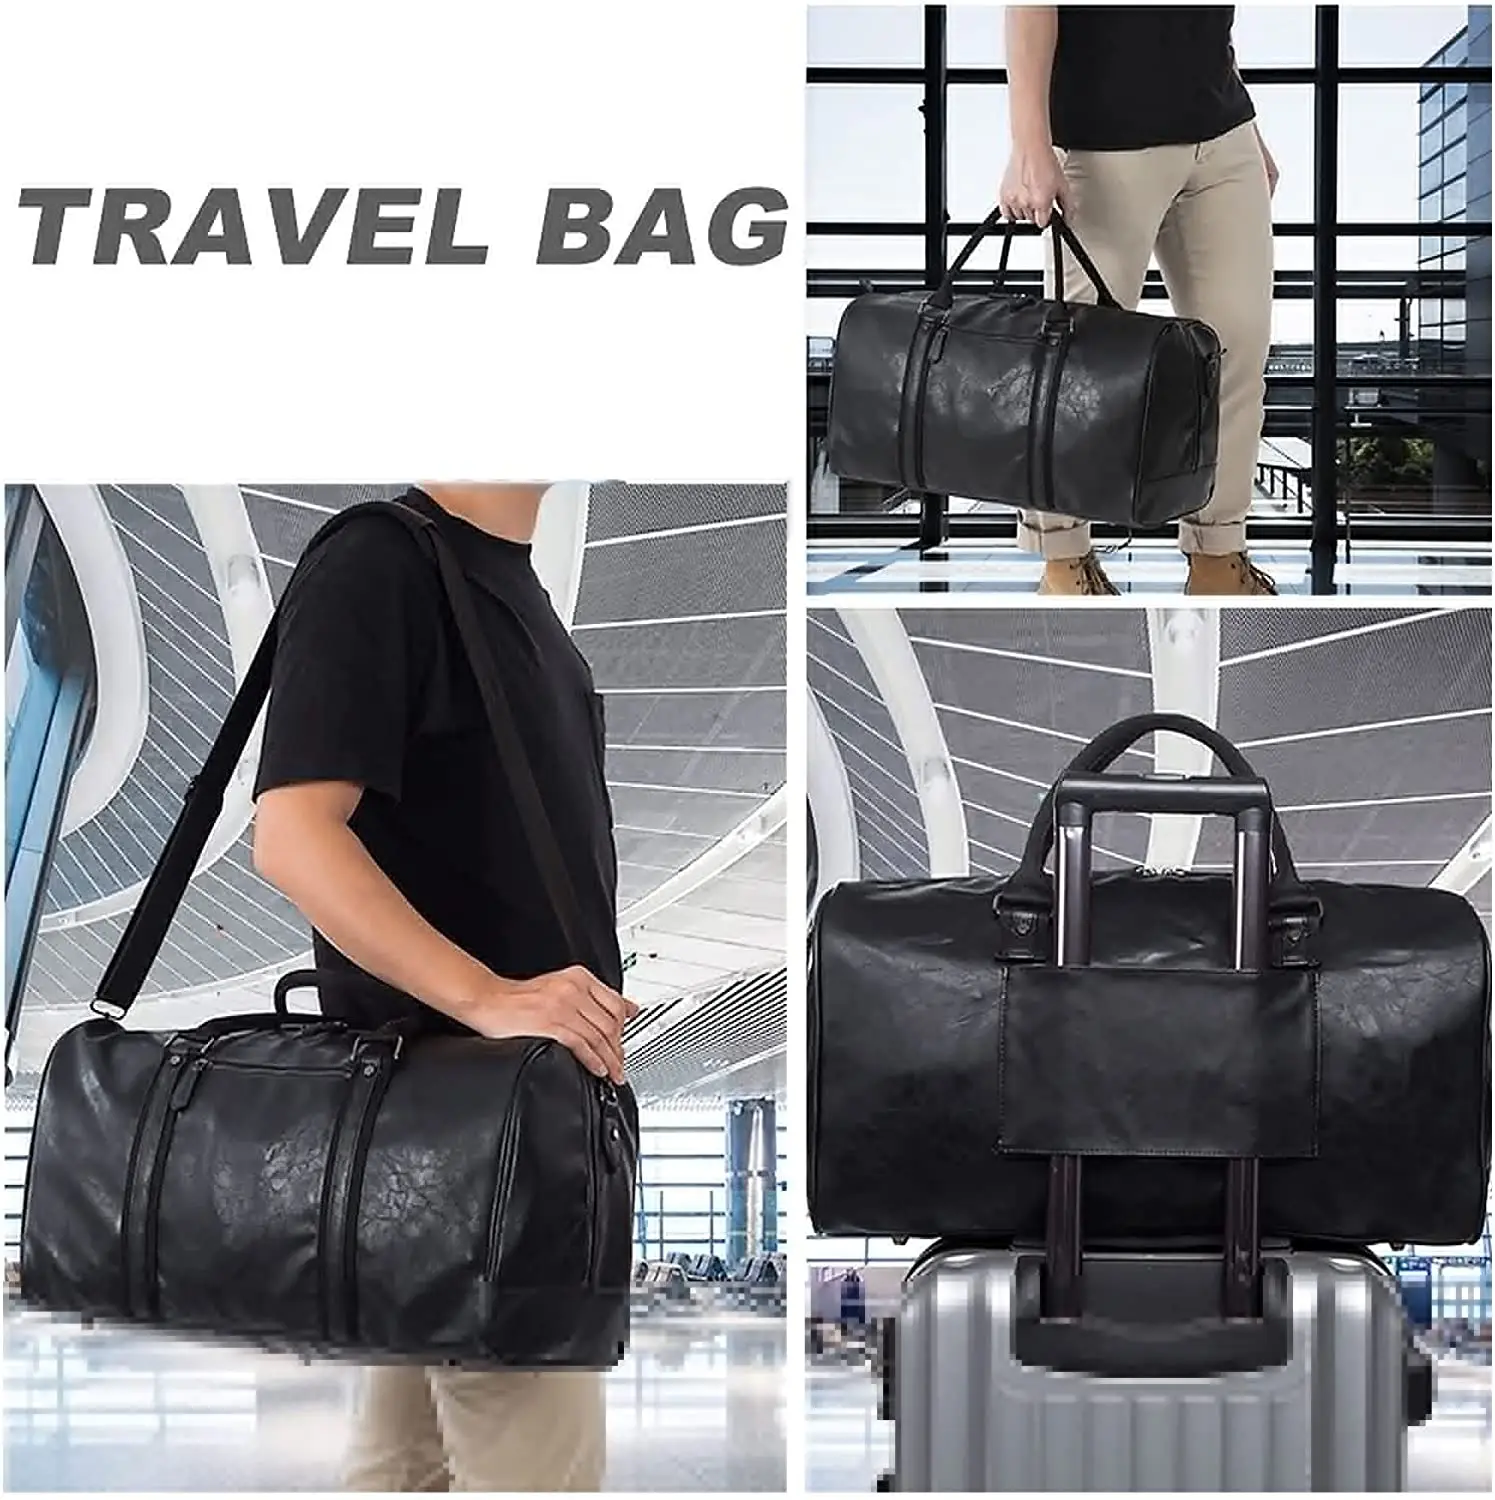 China Luxury Leather Duffel Bag Manufacturers, Suppliers and Factory -  Conceptcase